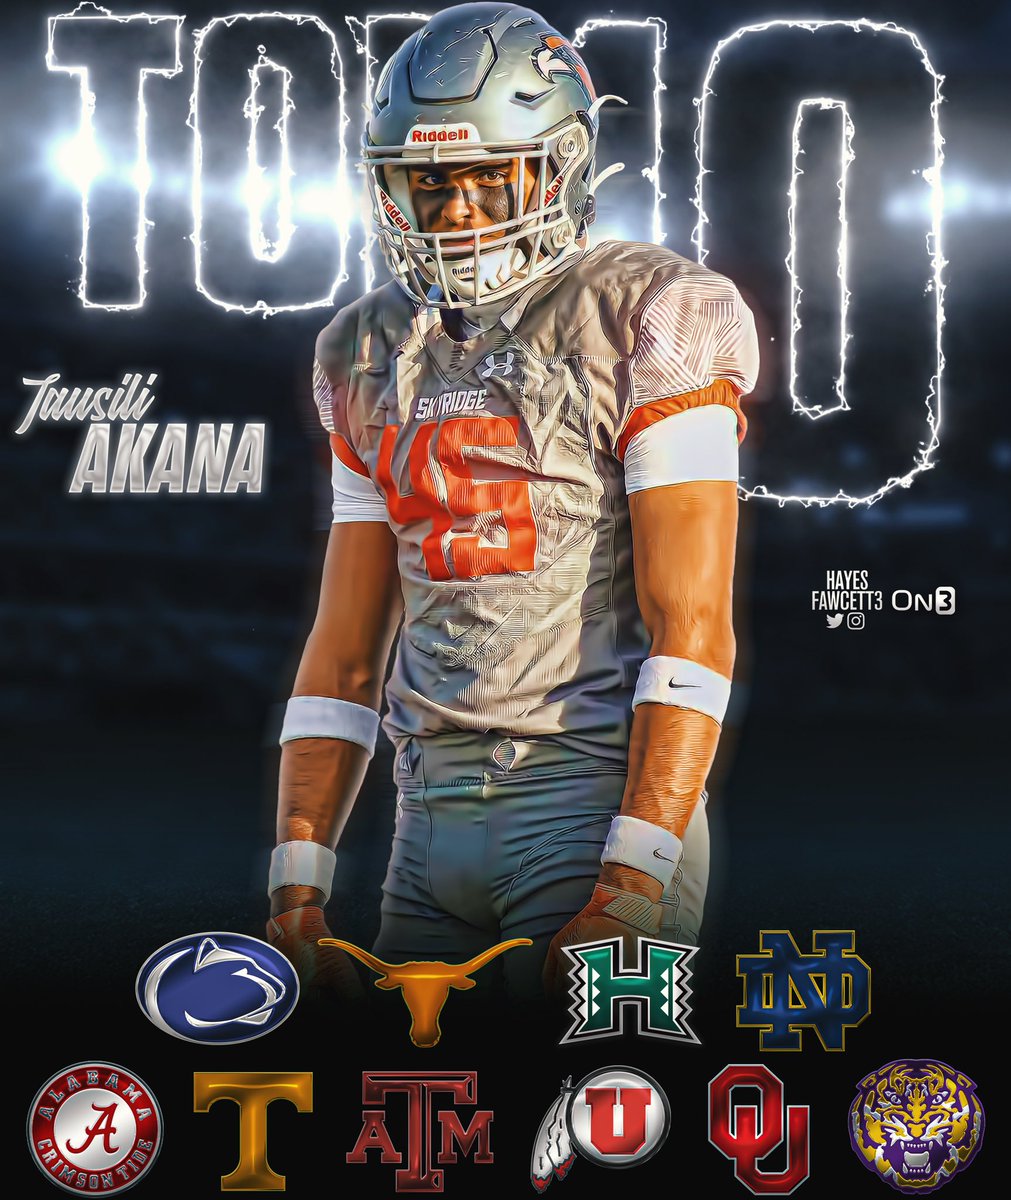 BREAKING: Four-Star Edge Tausili Akana is down to 🔟 Schools! The 6’4 215 Edge from Laie, HI is ranked as a Top 100 Player in the ‘23 Class. Where Should He Go? on3.com/db/tausili-aka…